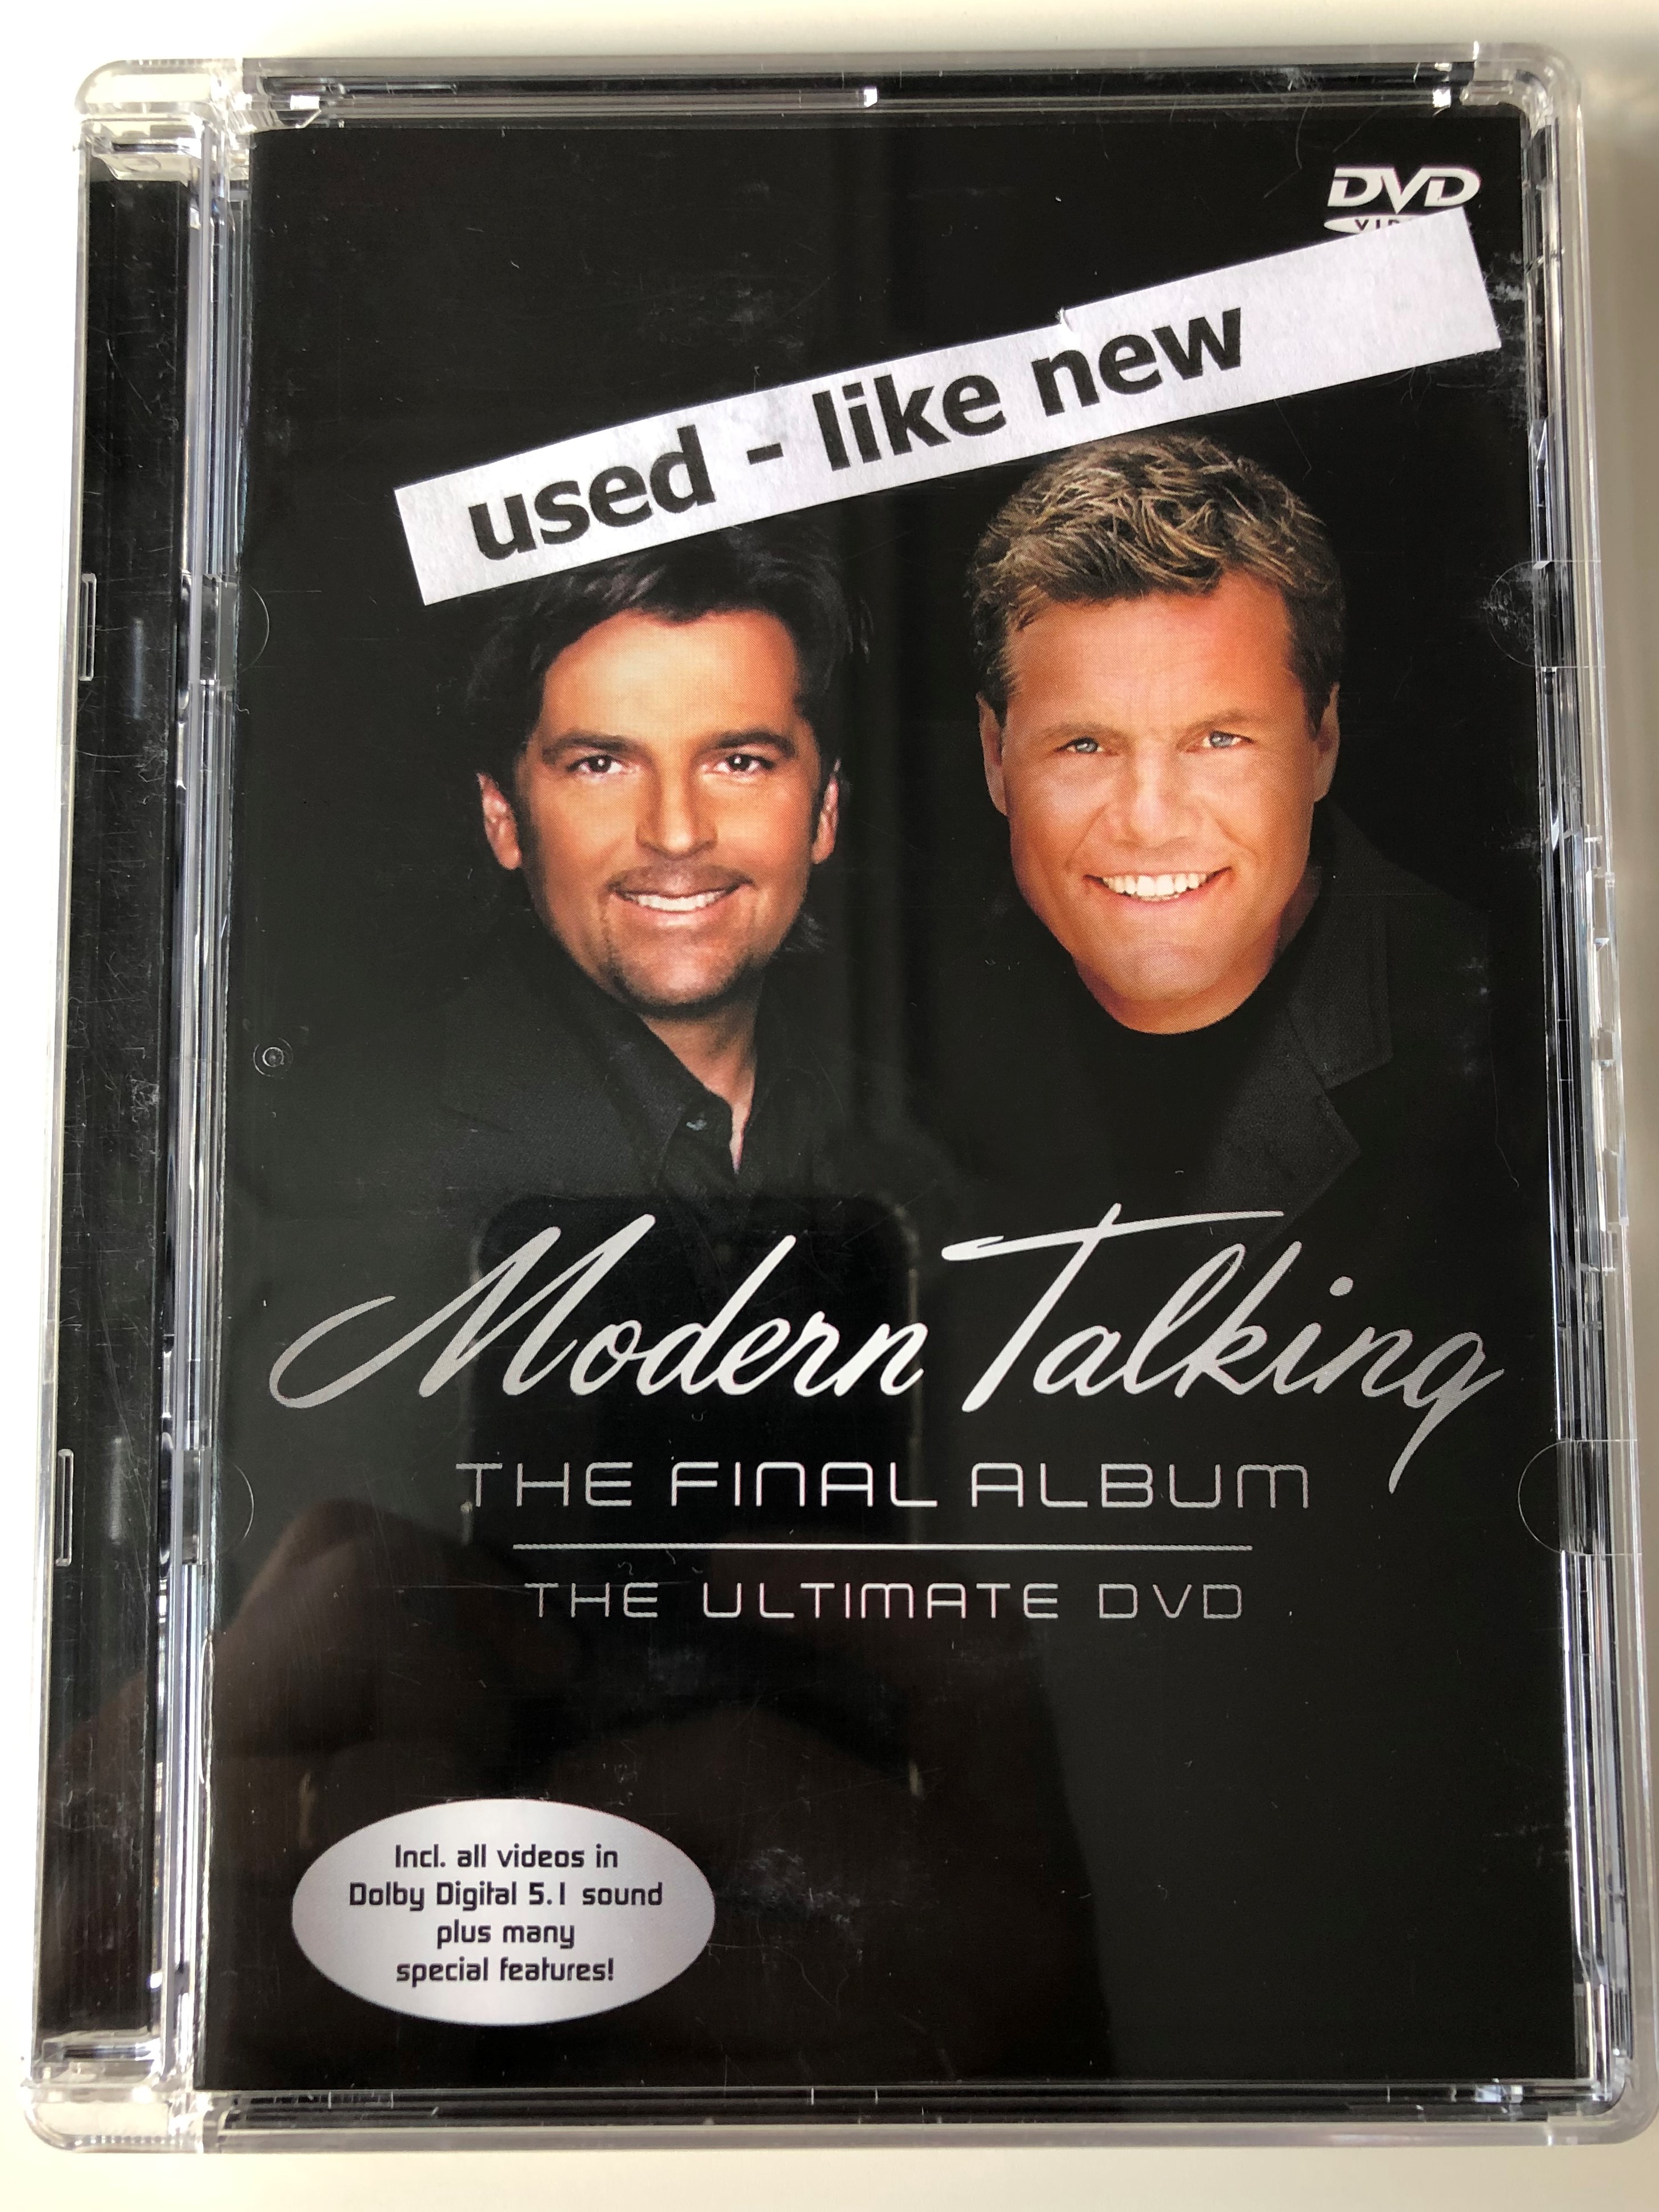 Modern Talking - The final Album - The Ultimate DVD 2003 / Includes all  videos in Dolby 5.1 sound plus many special features! - bibleinmylanguage